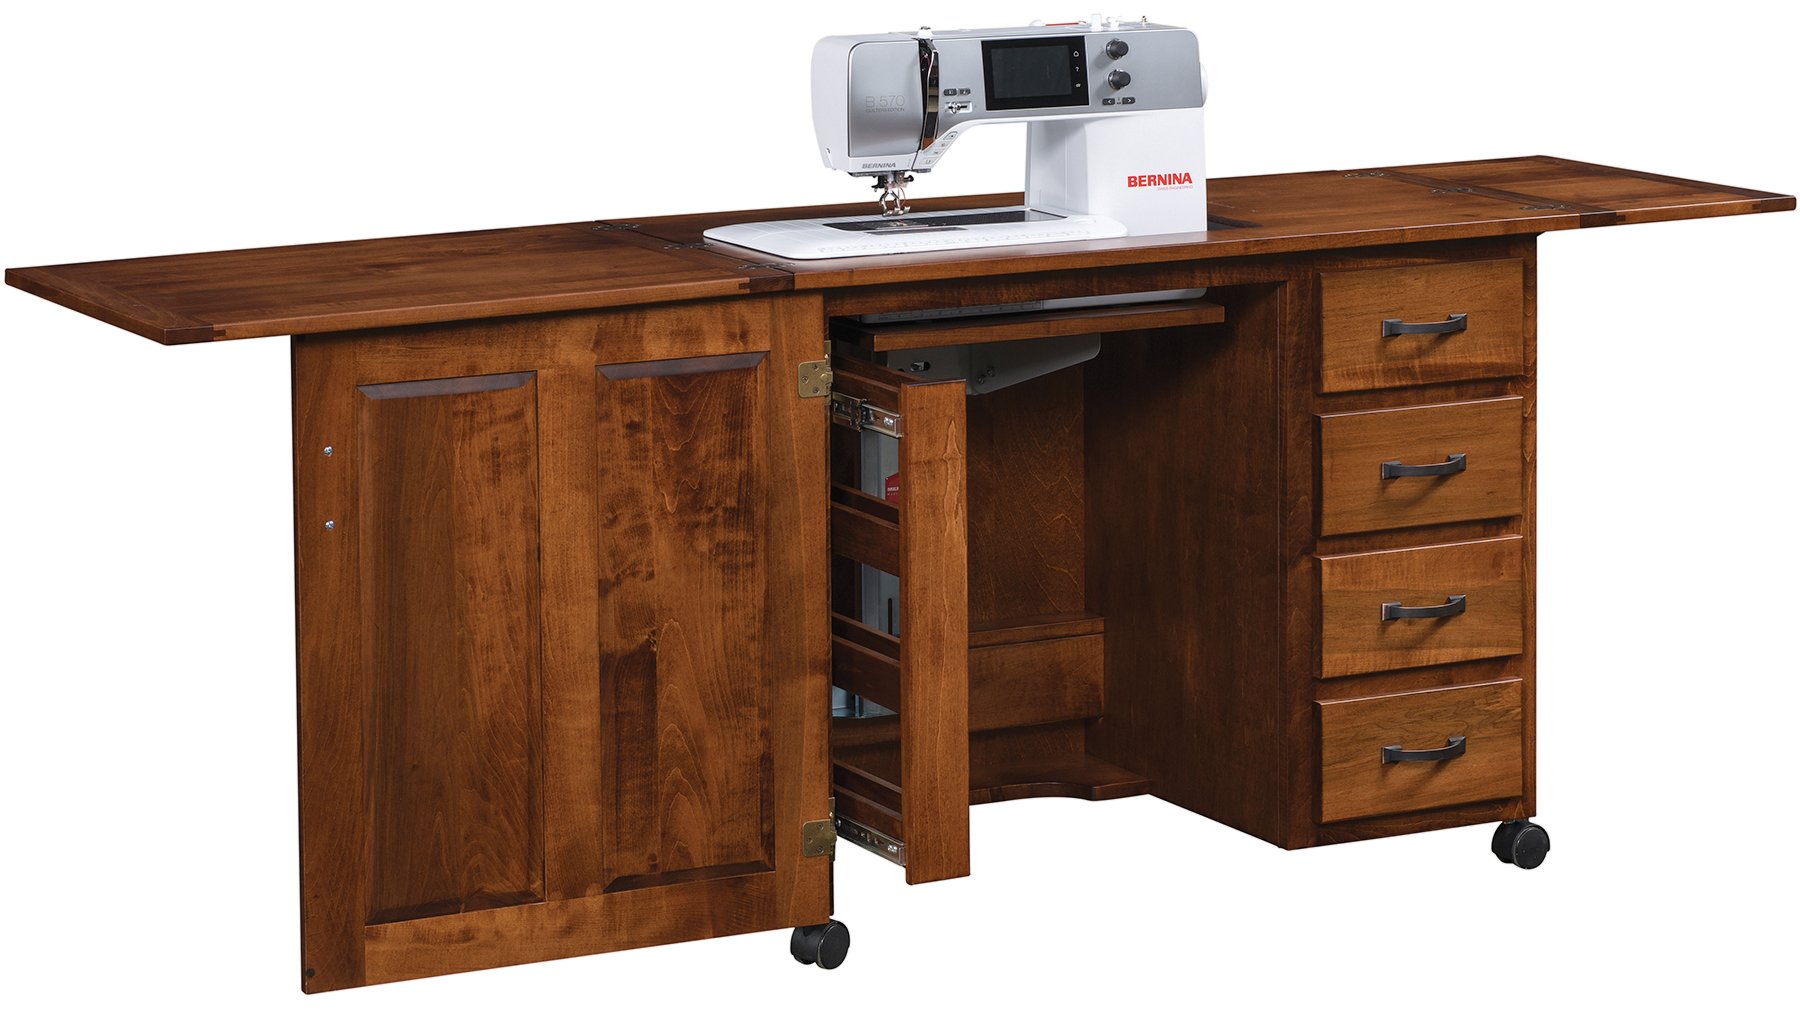 Sewing Machine Tables: Great Picks For Your Business